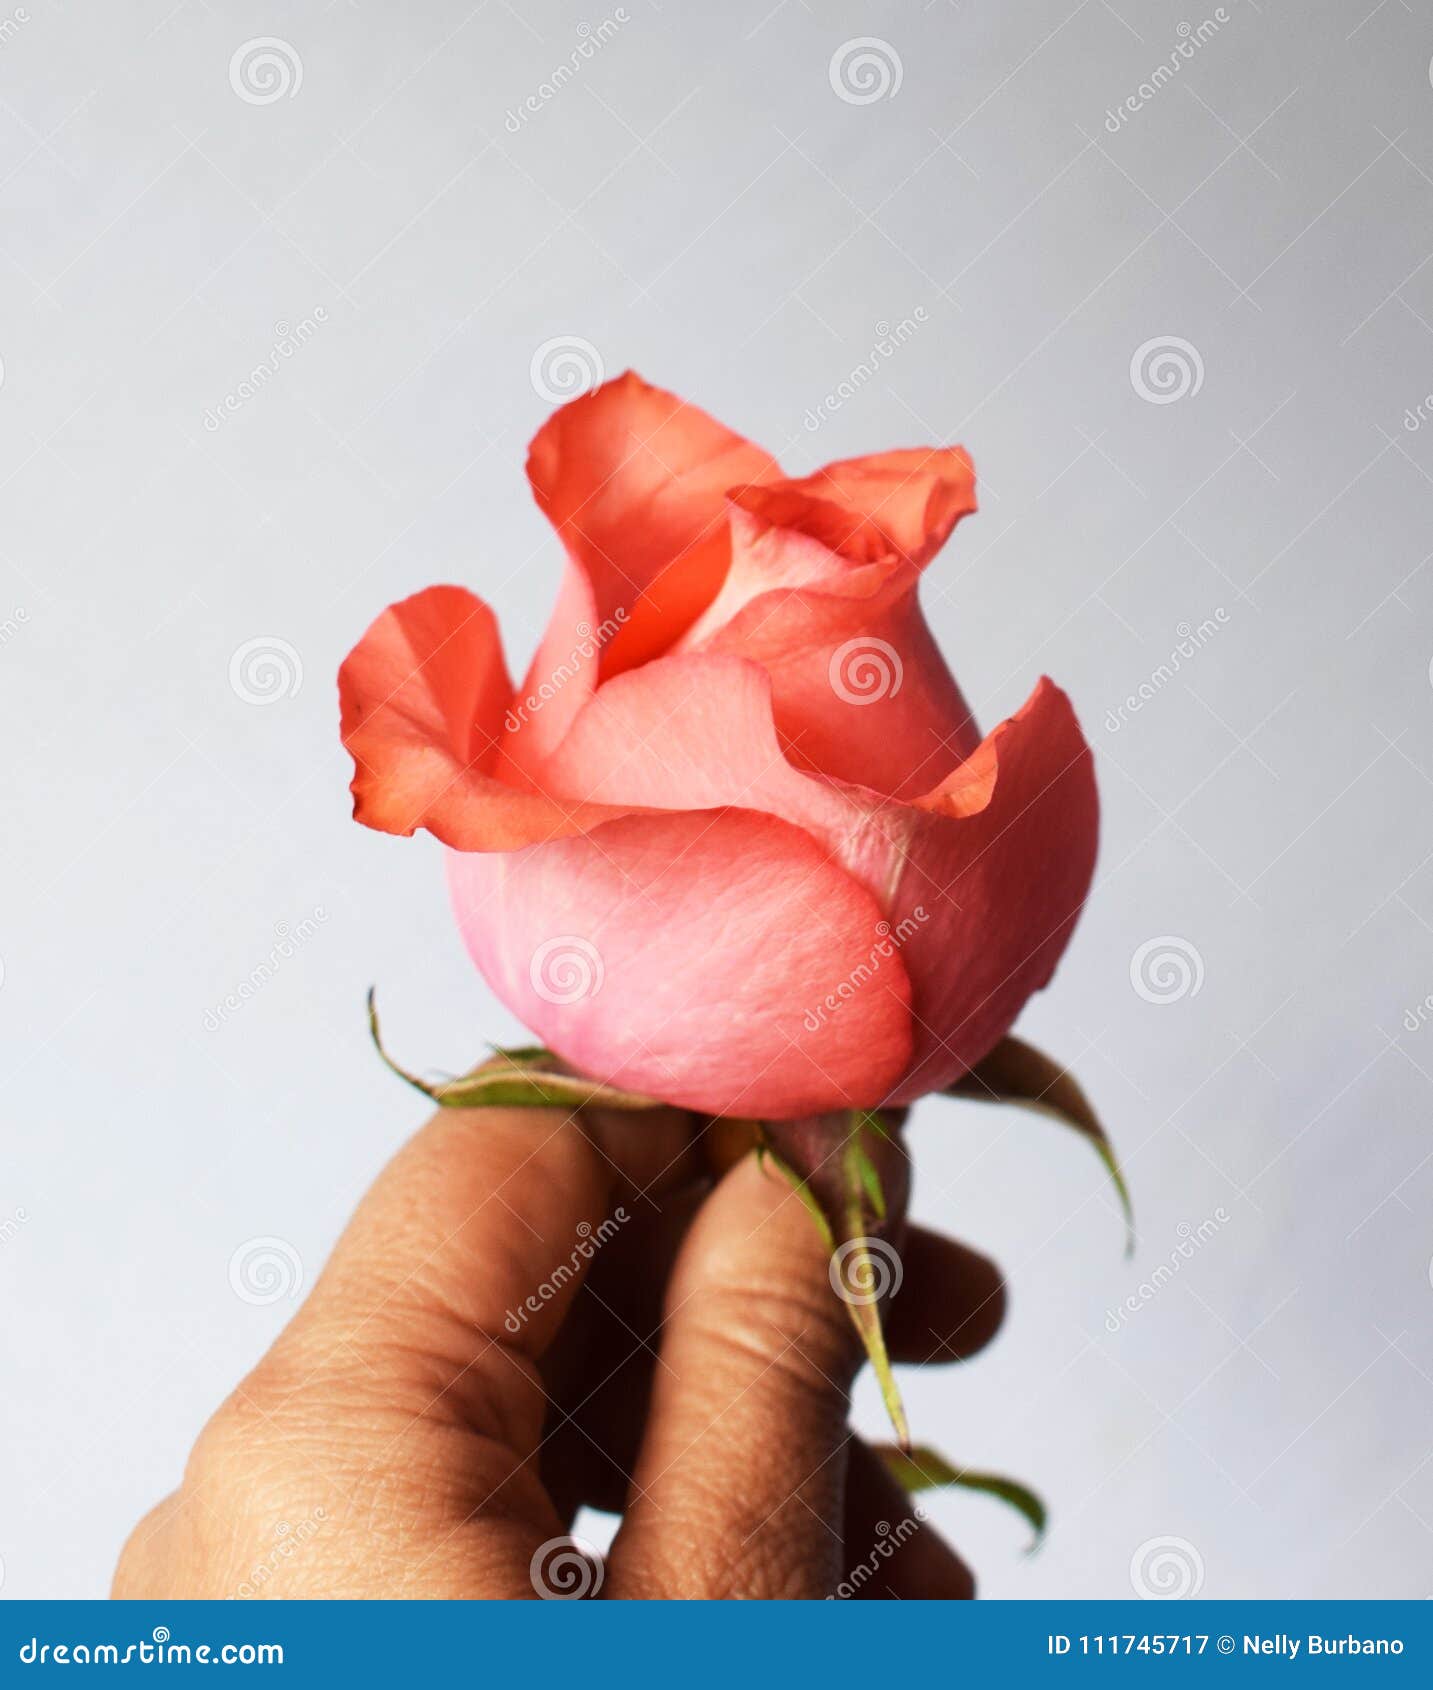 give a rose to mother